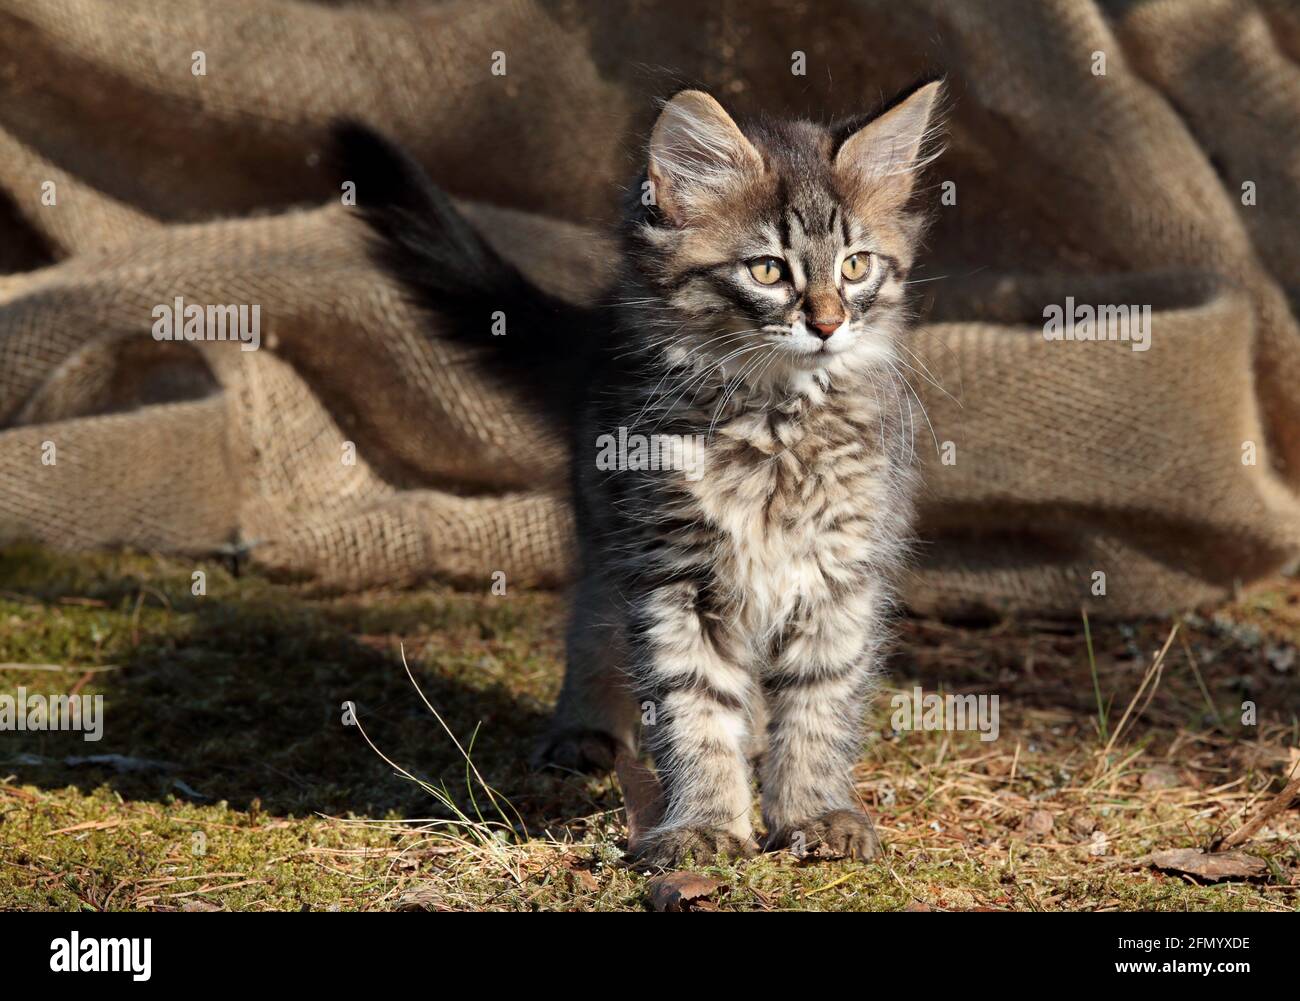 A four months old norwegian forest cat kitten standing outdoors in sunlight Stock Photo